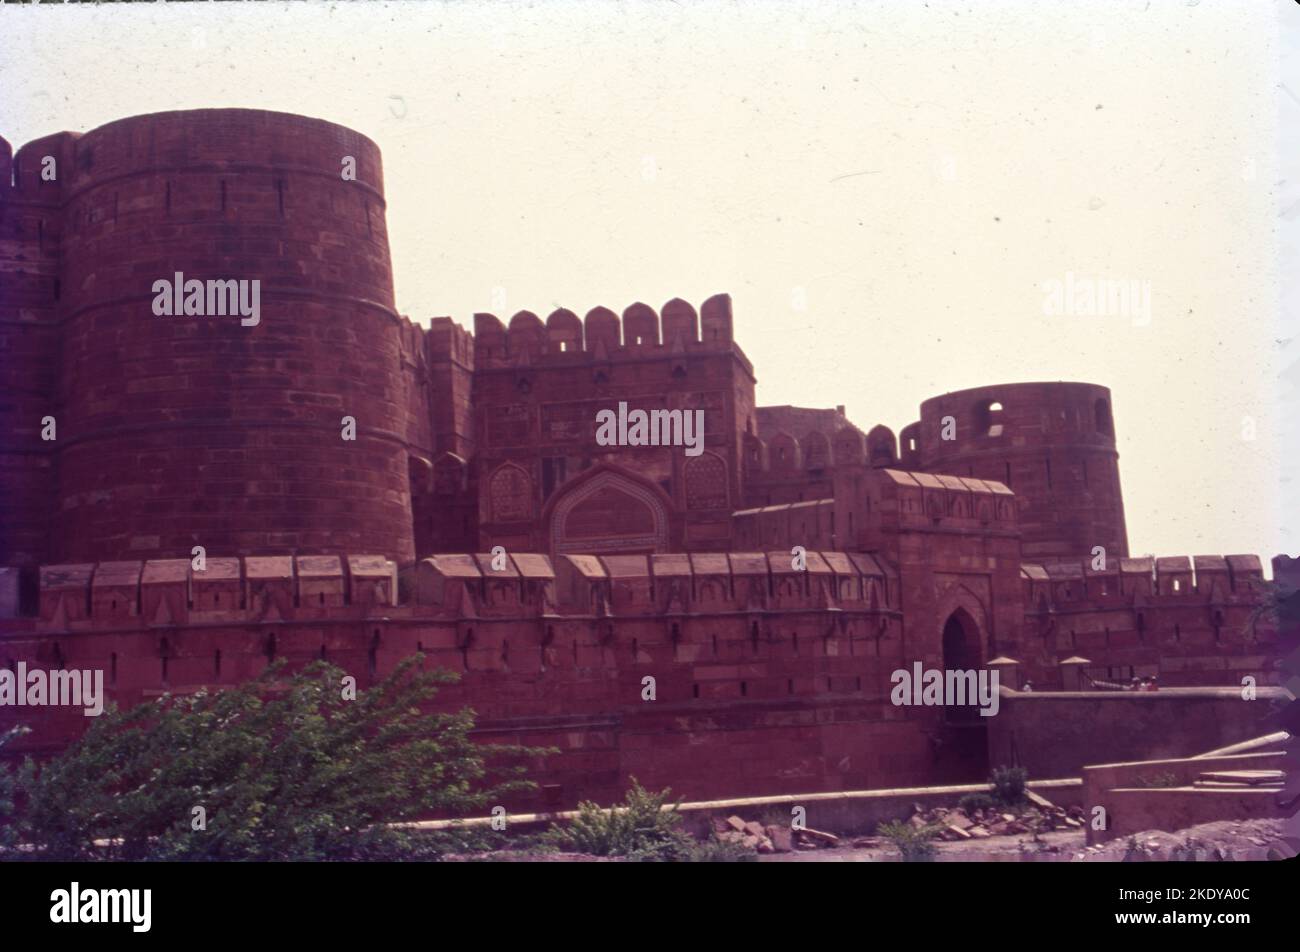 Agra fort is a historical fort in the city of Agra in India also known as red fort. It was built during 1565-1573 for Mughal Emperor Akbar. It was the main residence of the rulers of Sikarwar clan of Rajputs until mughals occupied it and Mughal Dynasty until 1638, when the capital was shifted from Agra to Delhi. Stock Photo